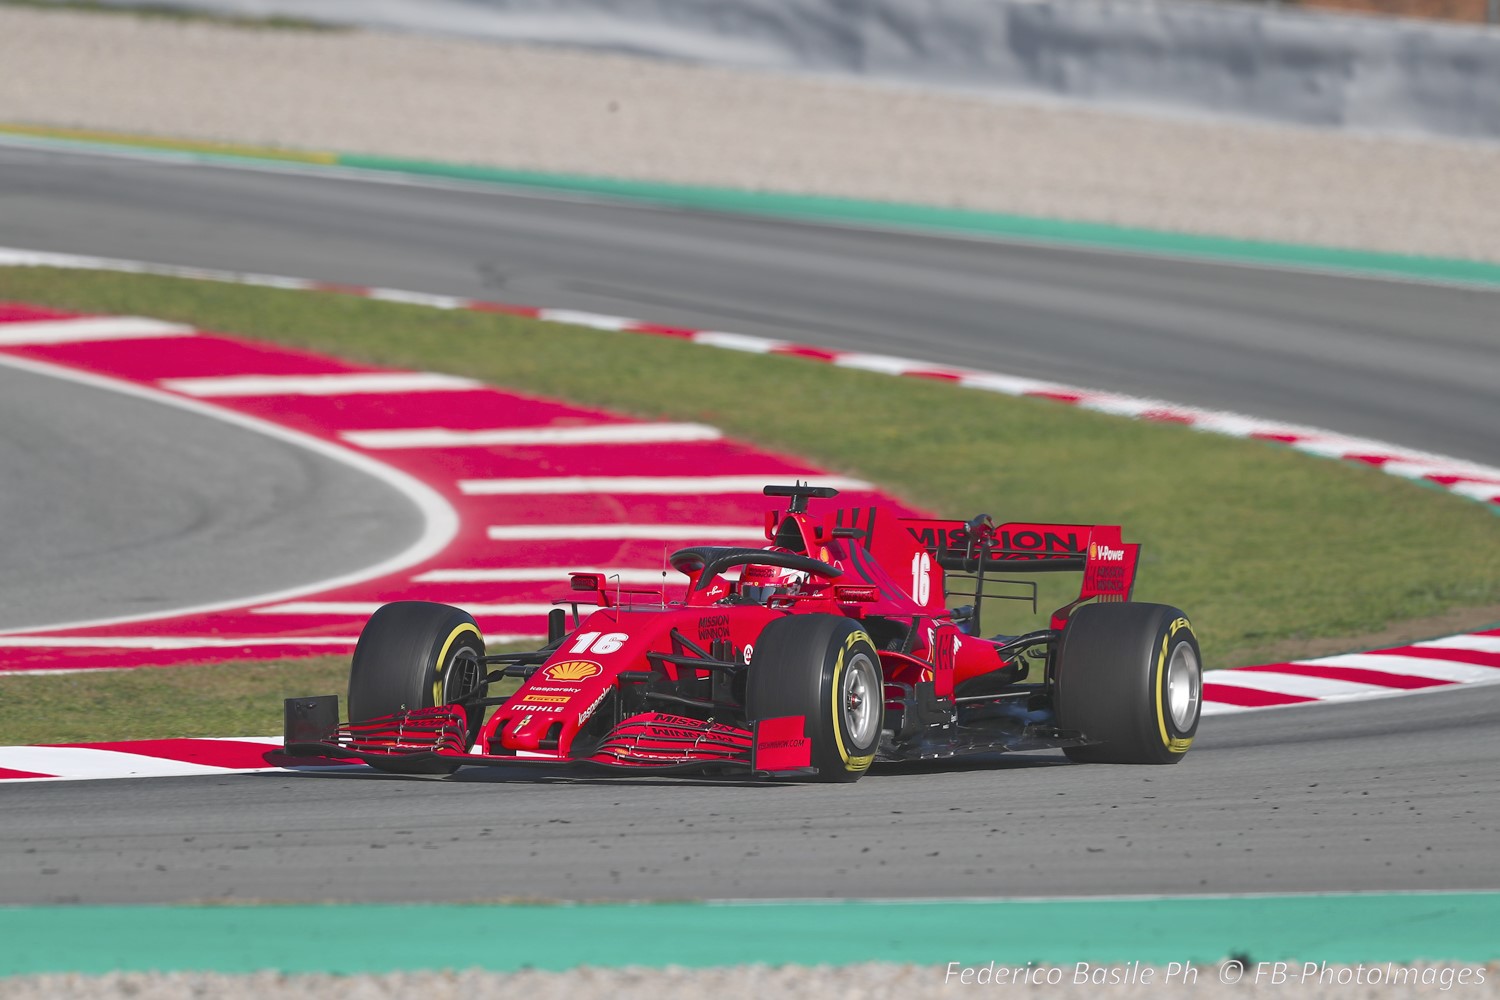 Will Ferrari leave Melbourne with their tail between their legs?